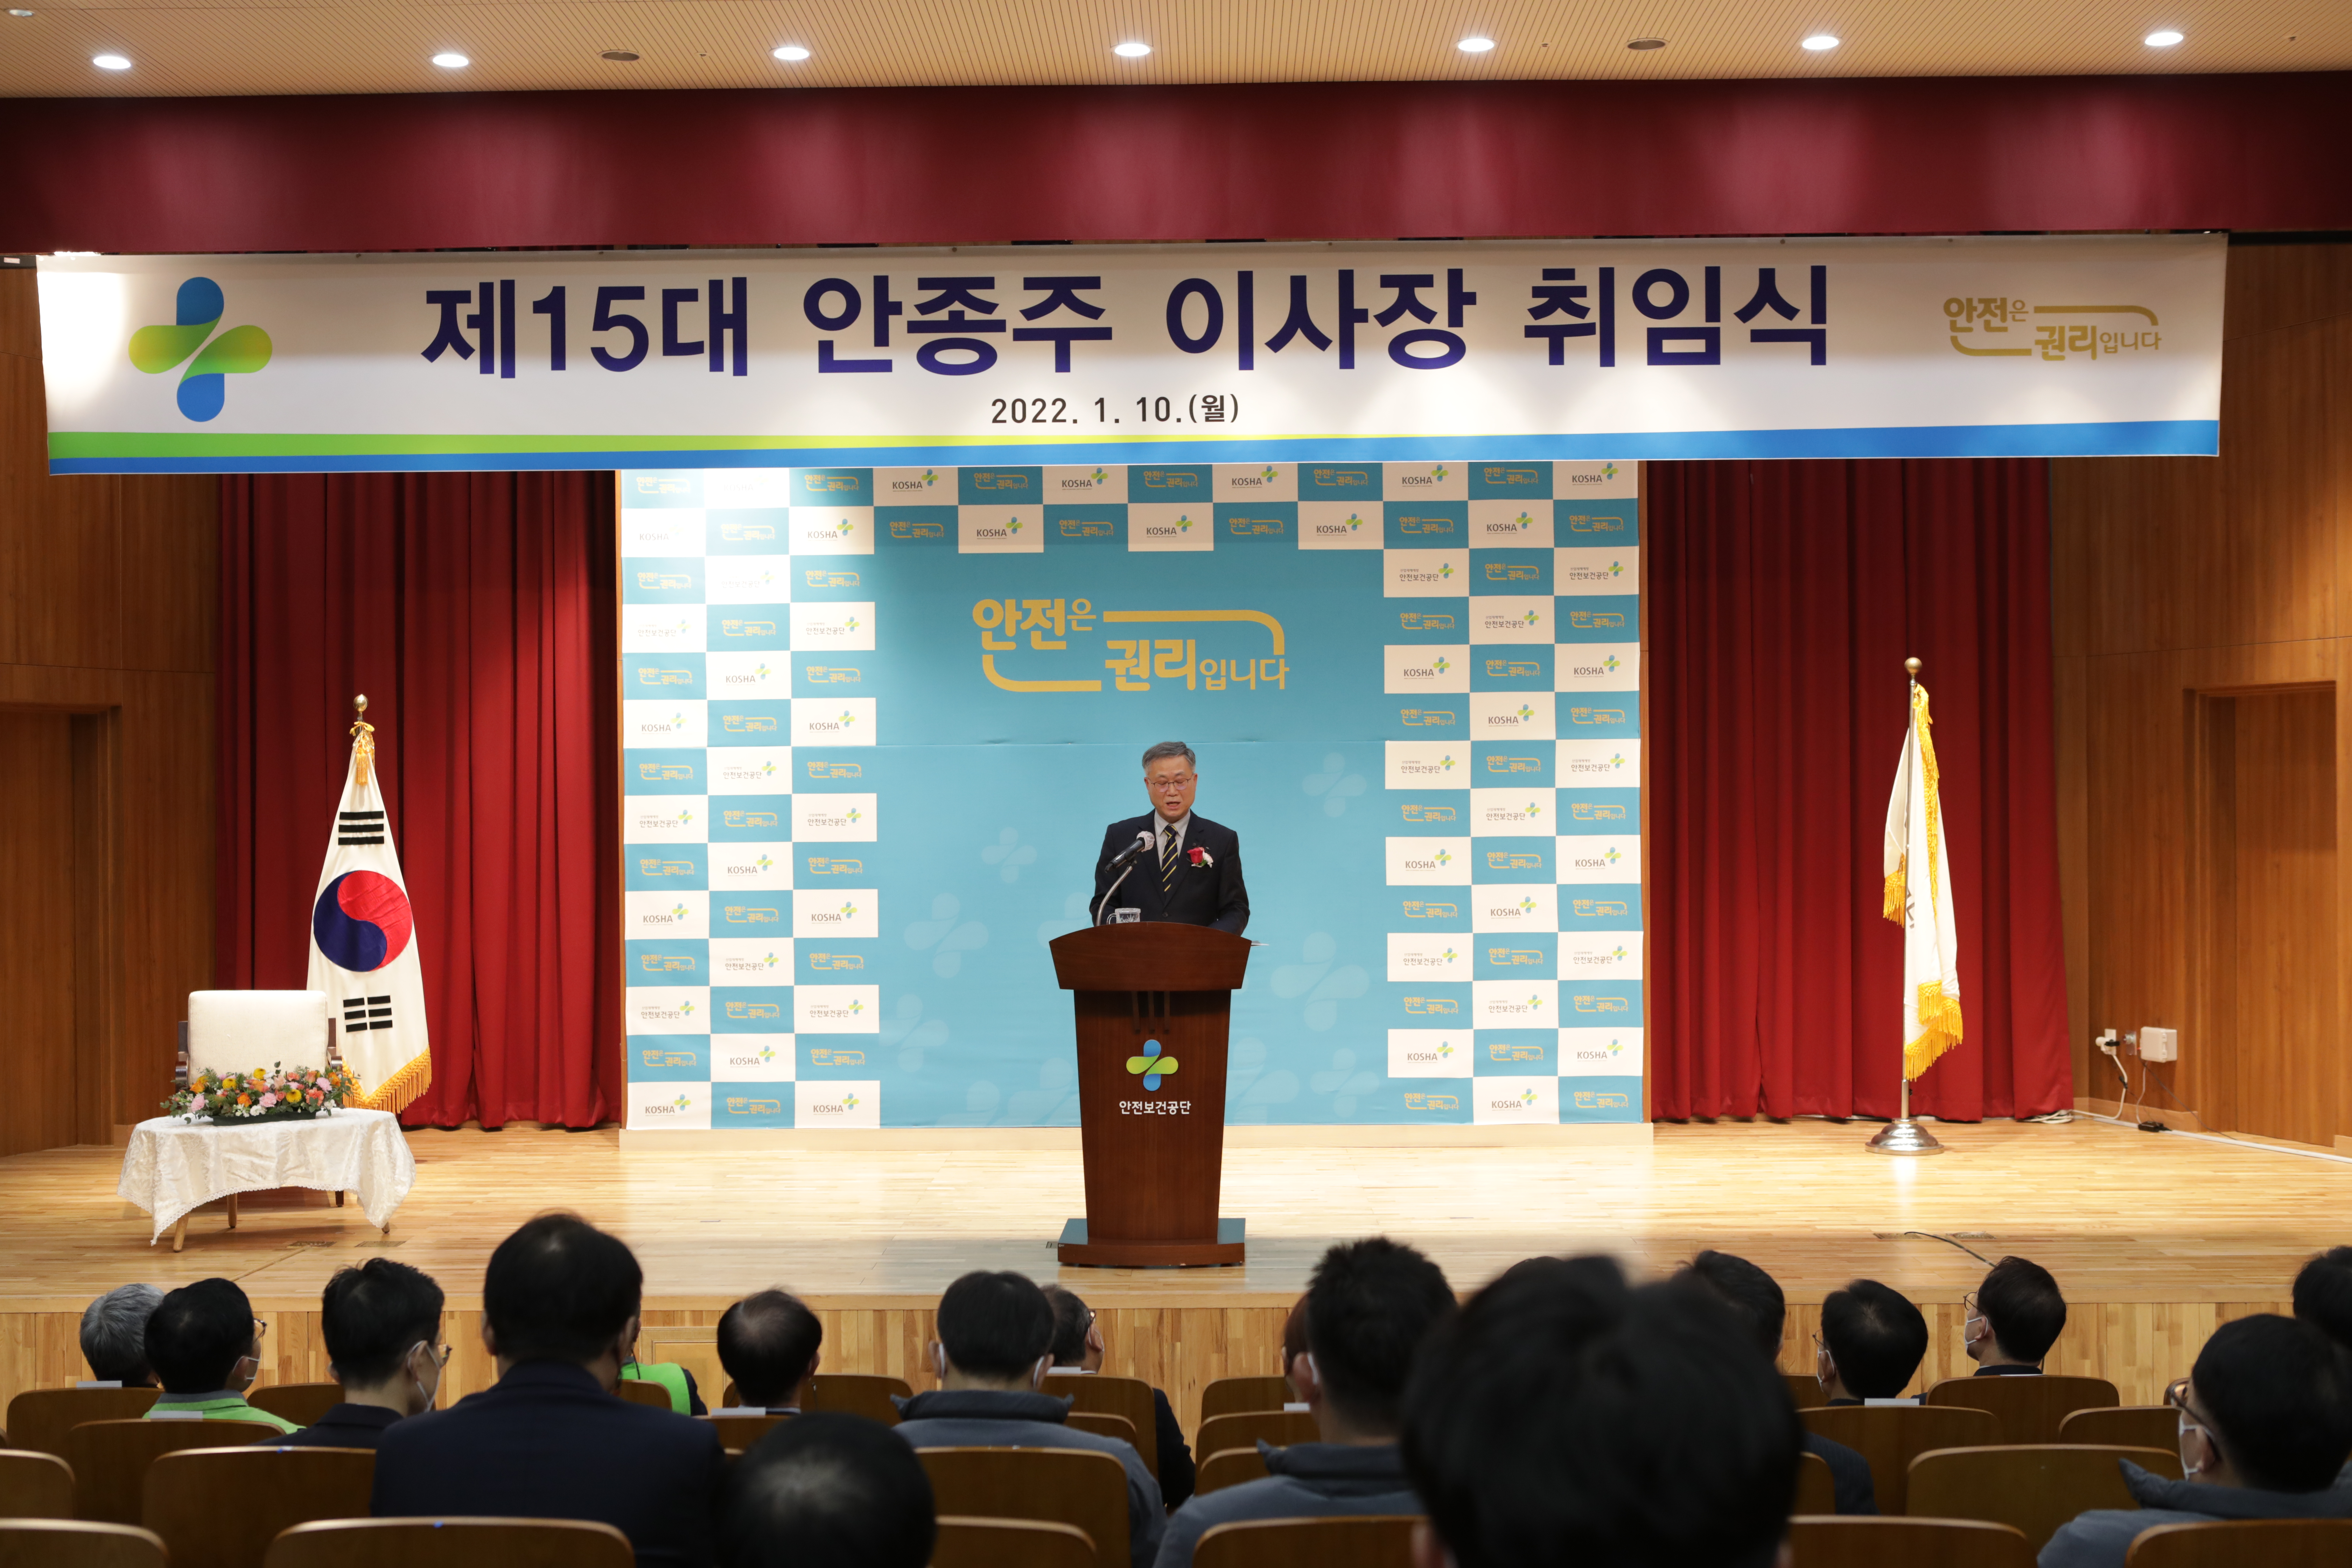 Dr. Ahn, Jong Ju is inaugurated as the 15th President of Korea Occupational Safety and Health Agency(KOSHA)